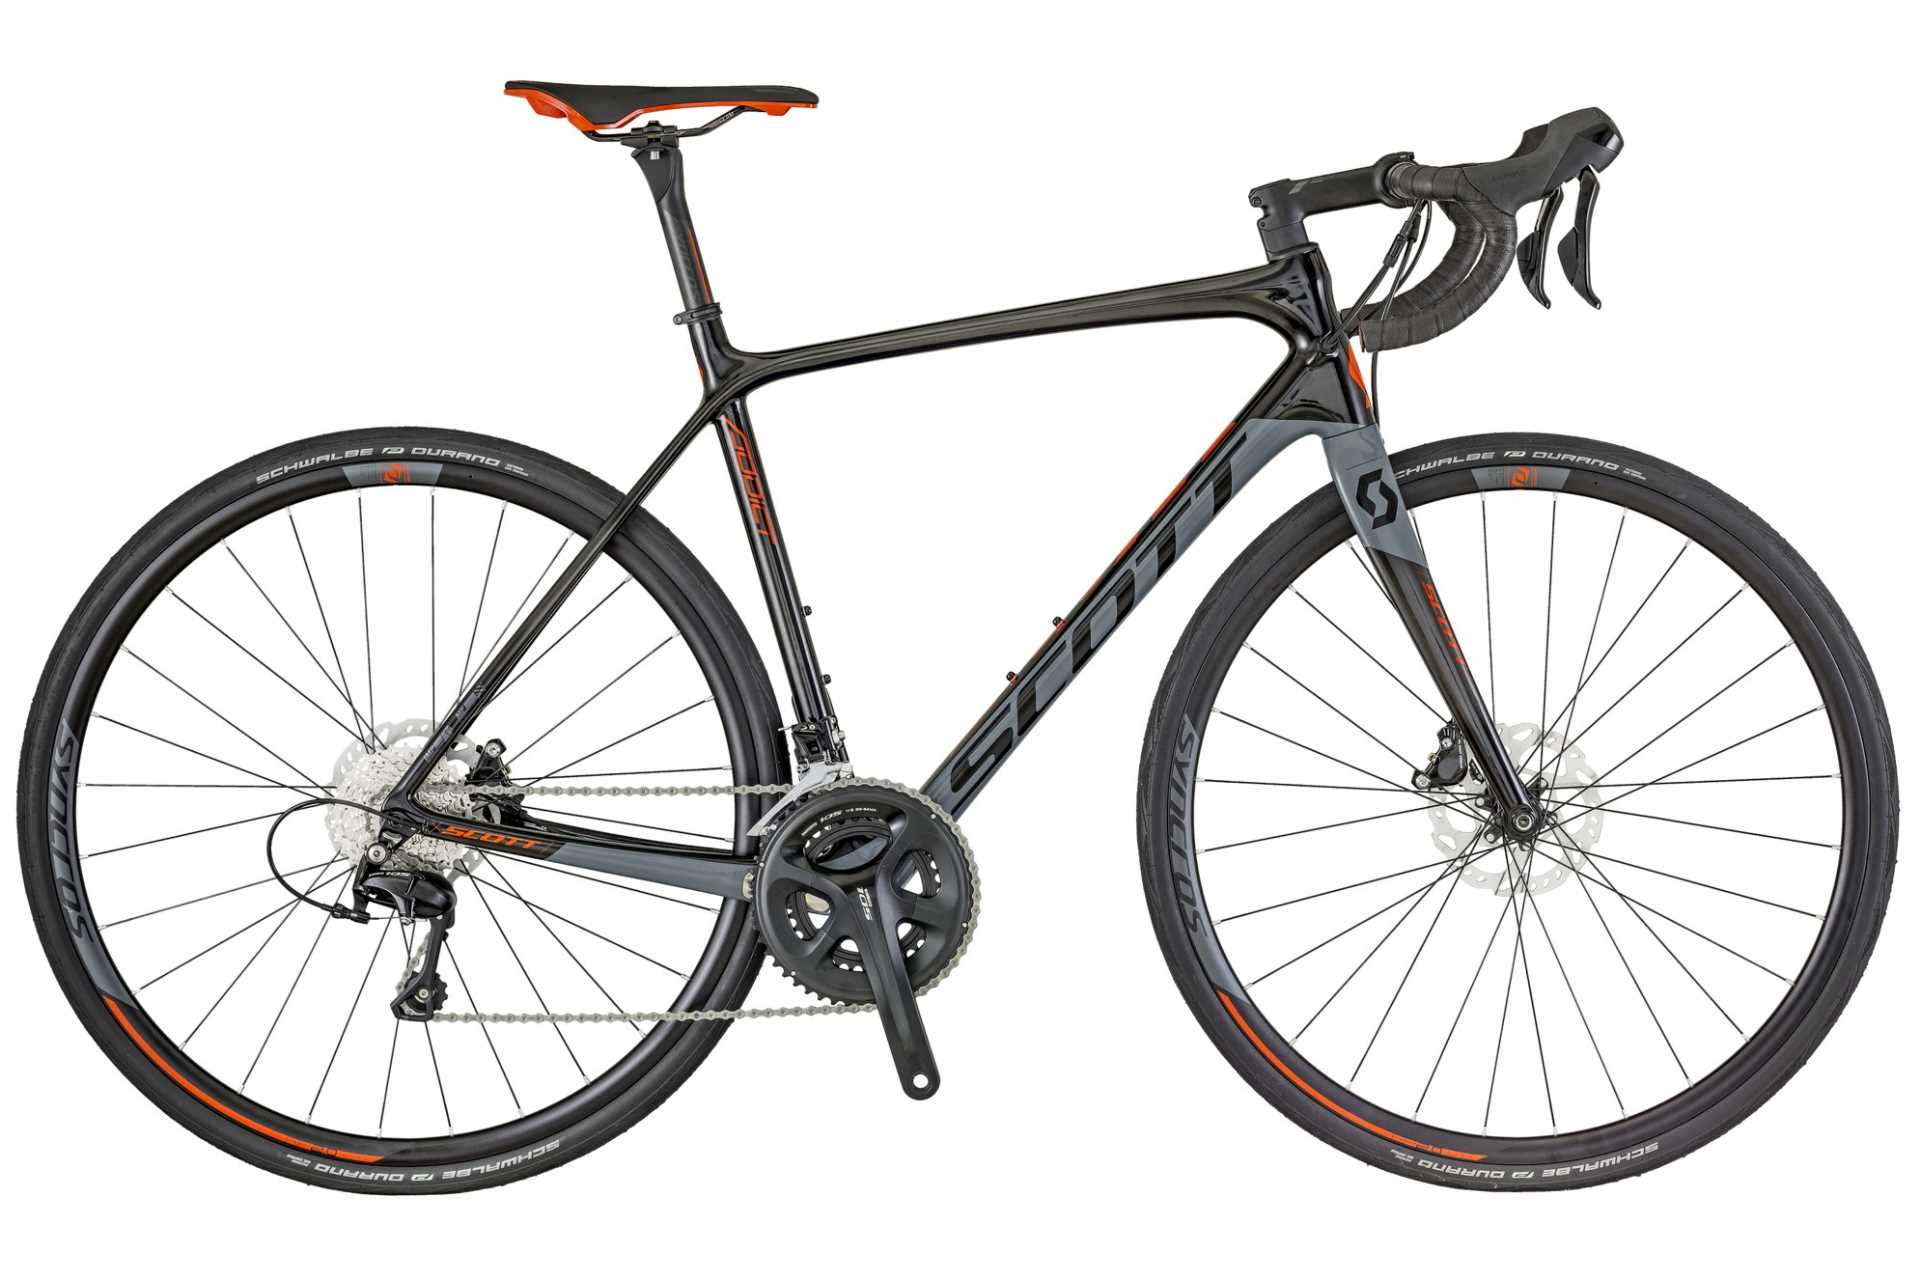 Scott 2018 road bikes: which machine is right for you?